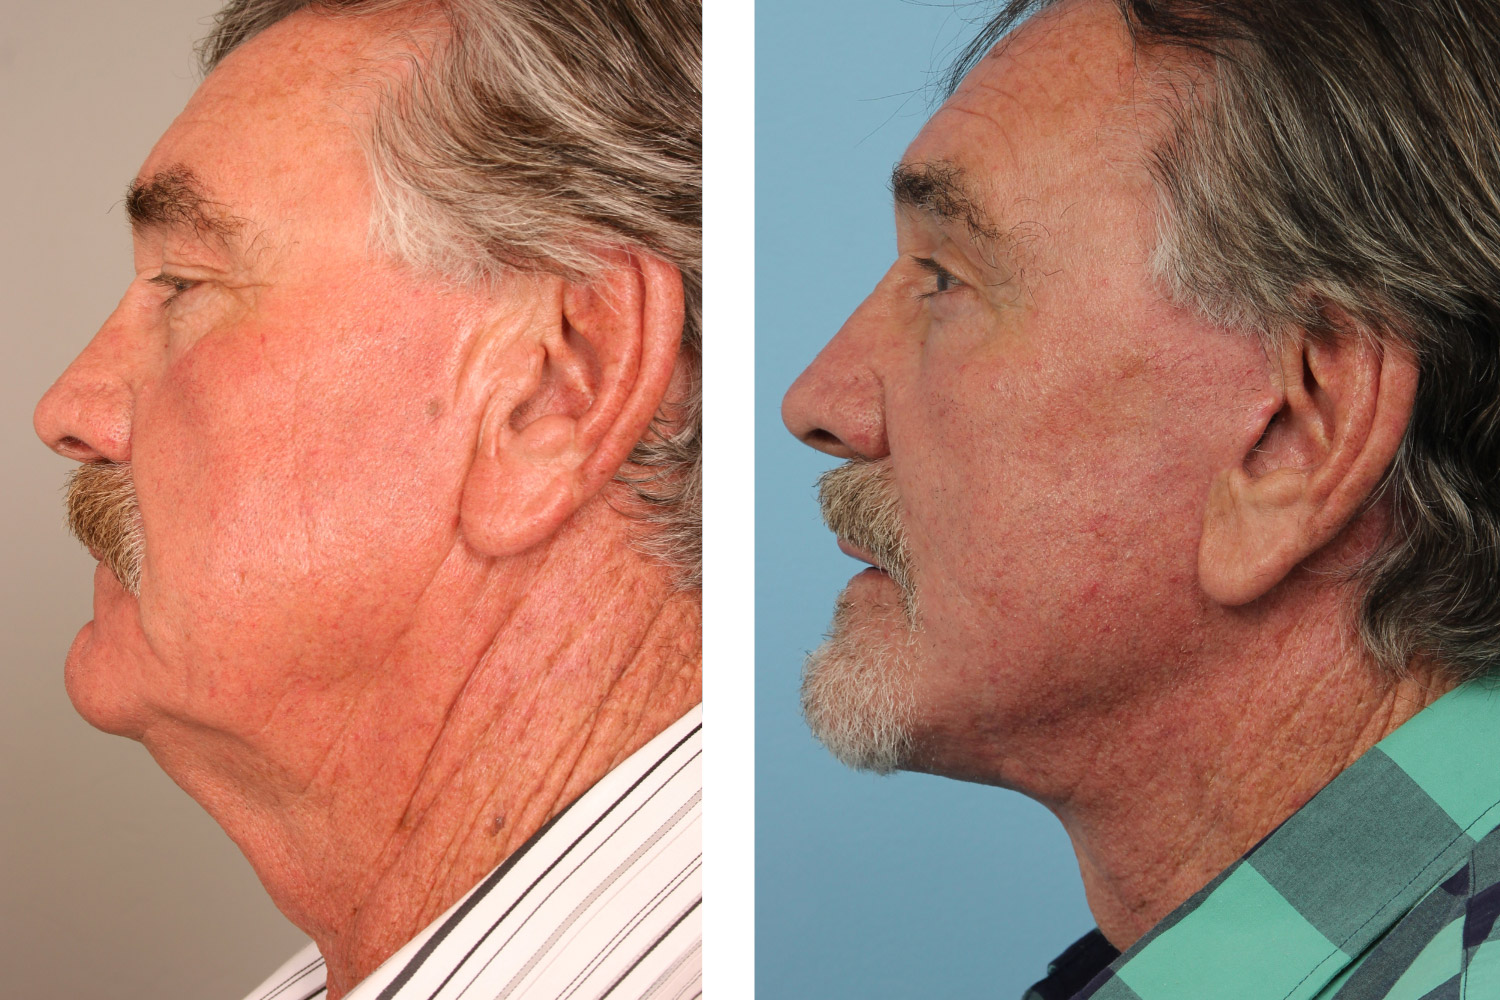 Complex neck lift and lower face lift on a 70-year-old man